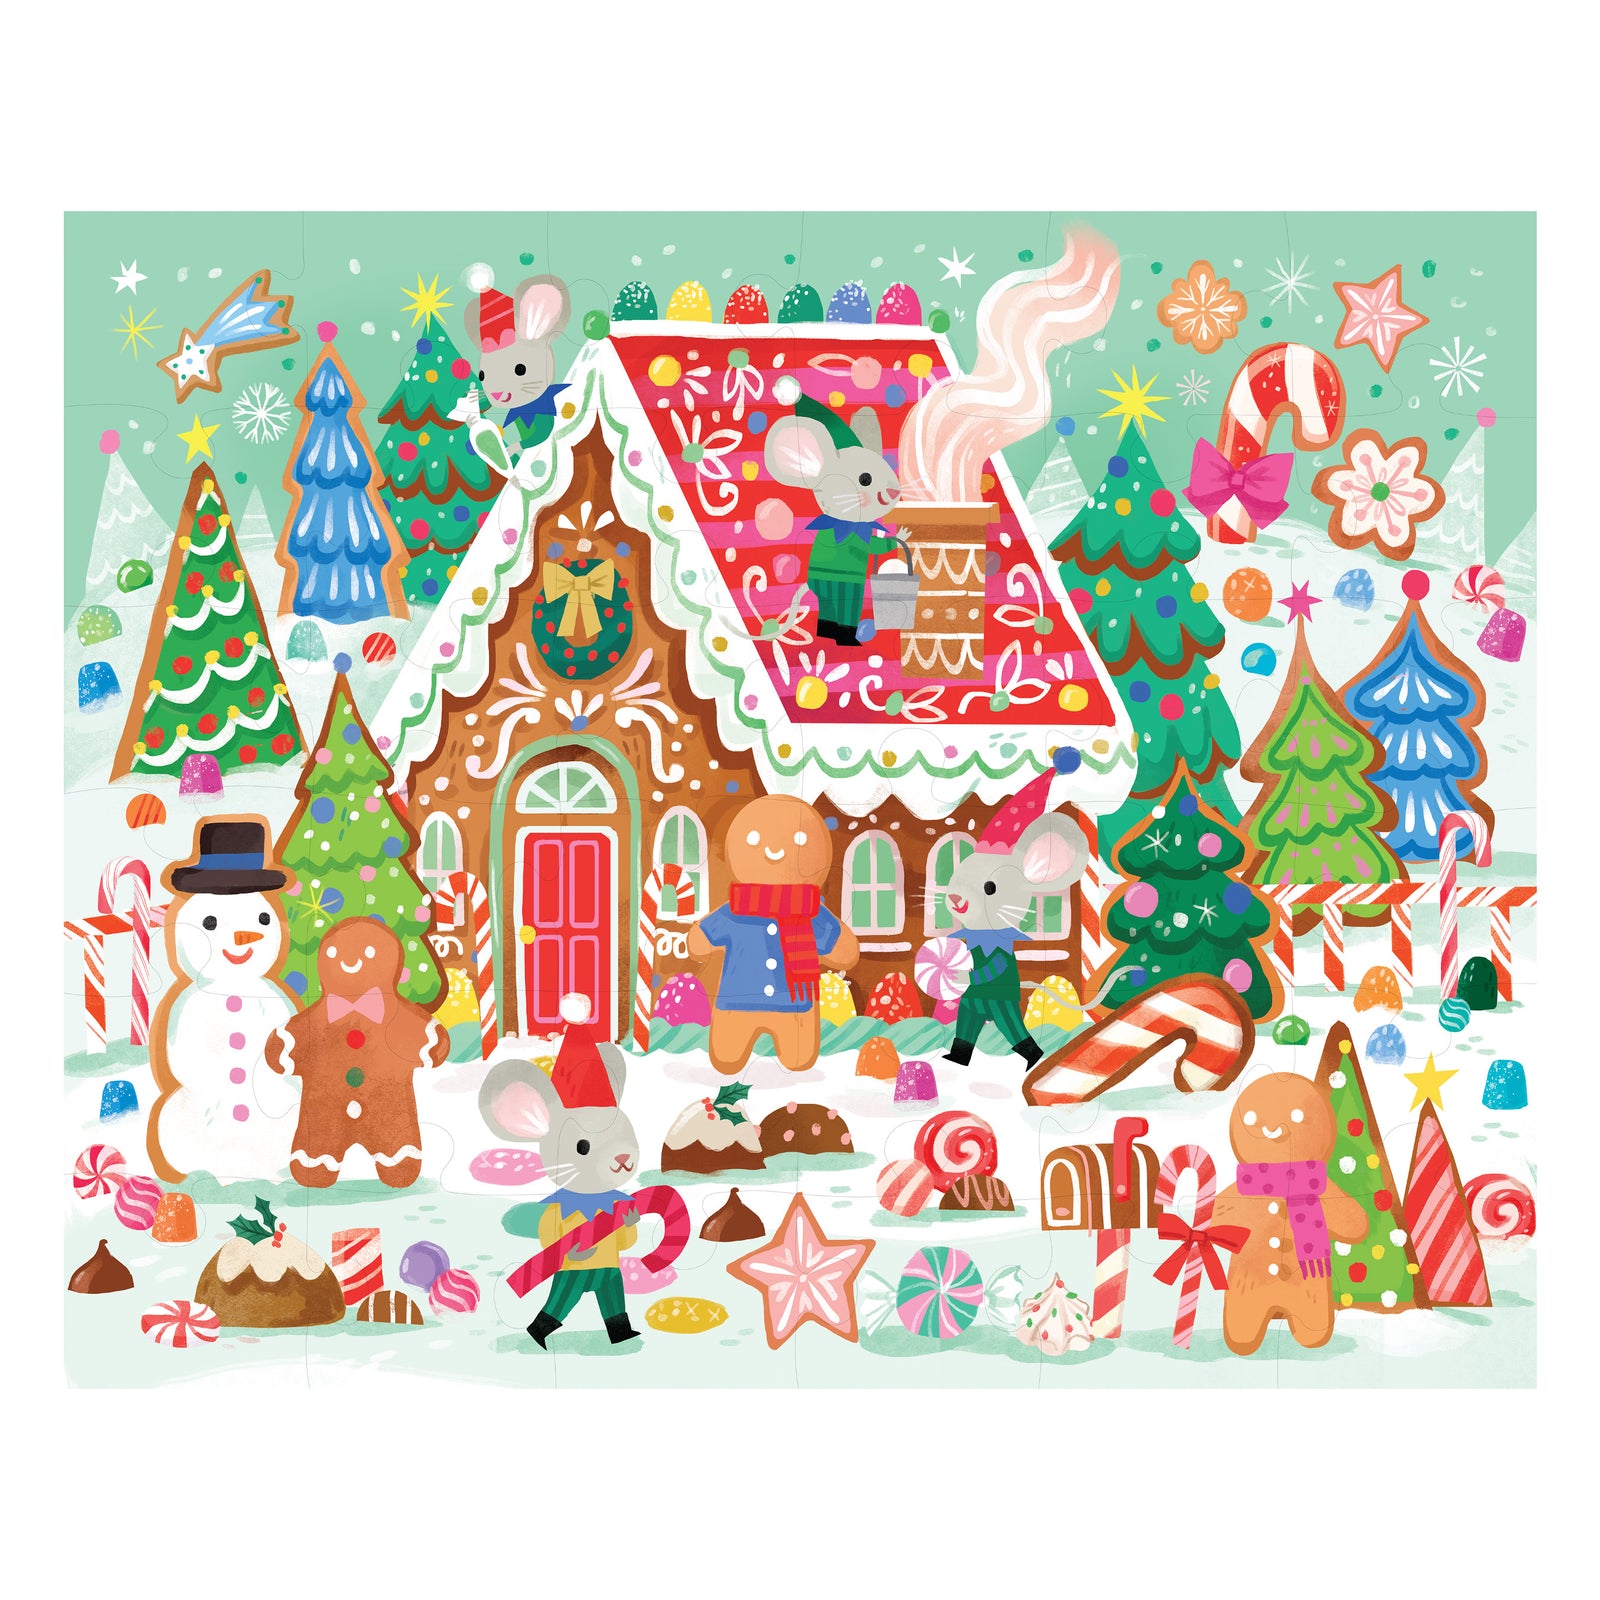 36-Piece Puzzle - Gingerbread House